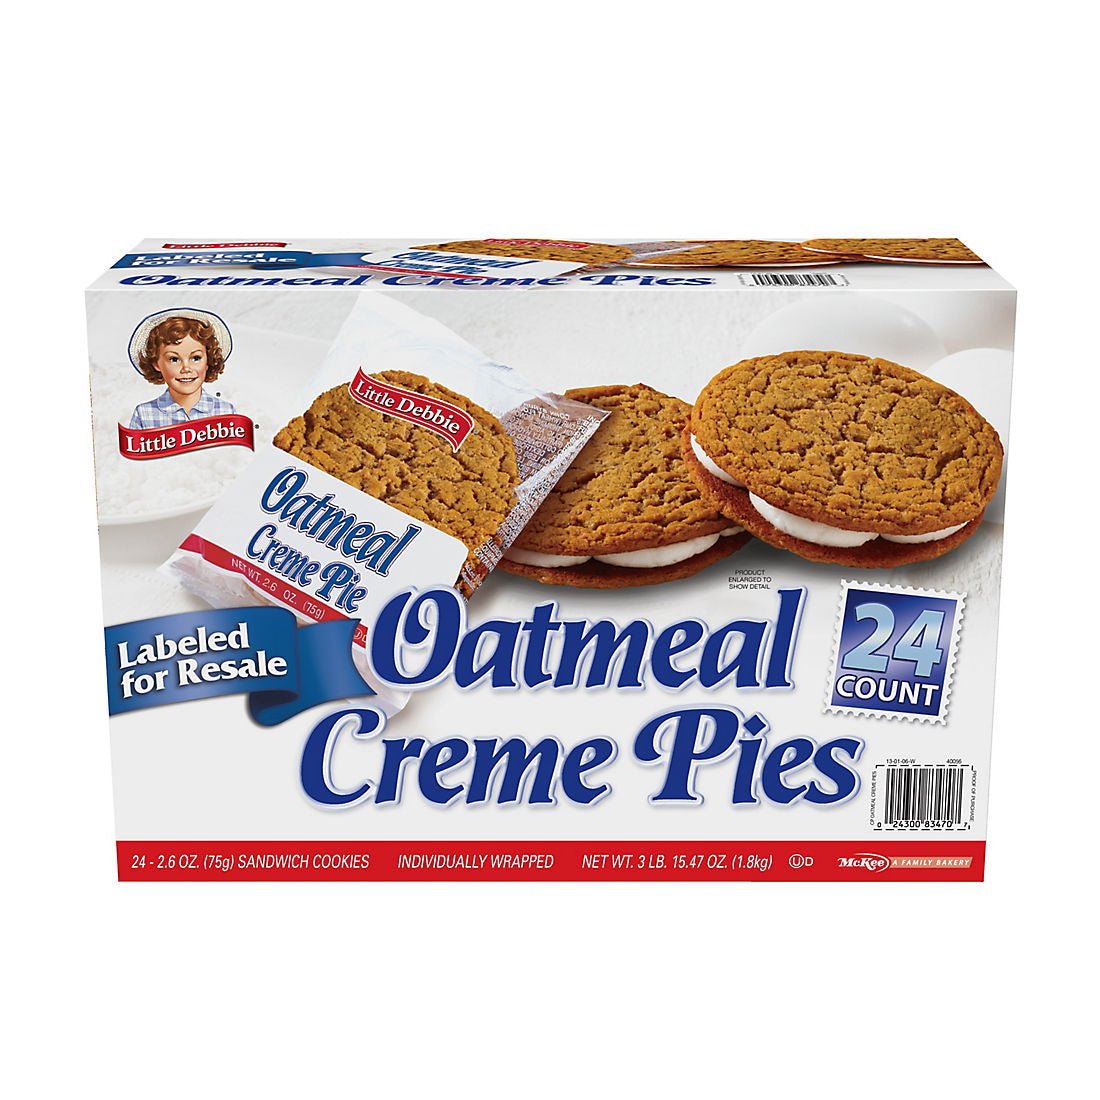 Oatmeal Creme Pie - The Fourth Place